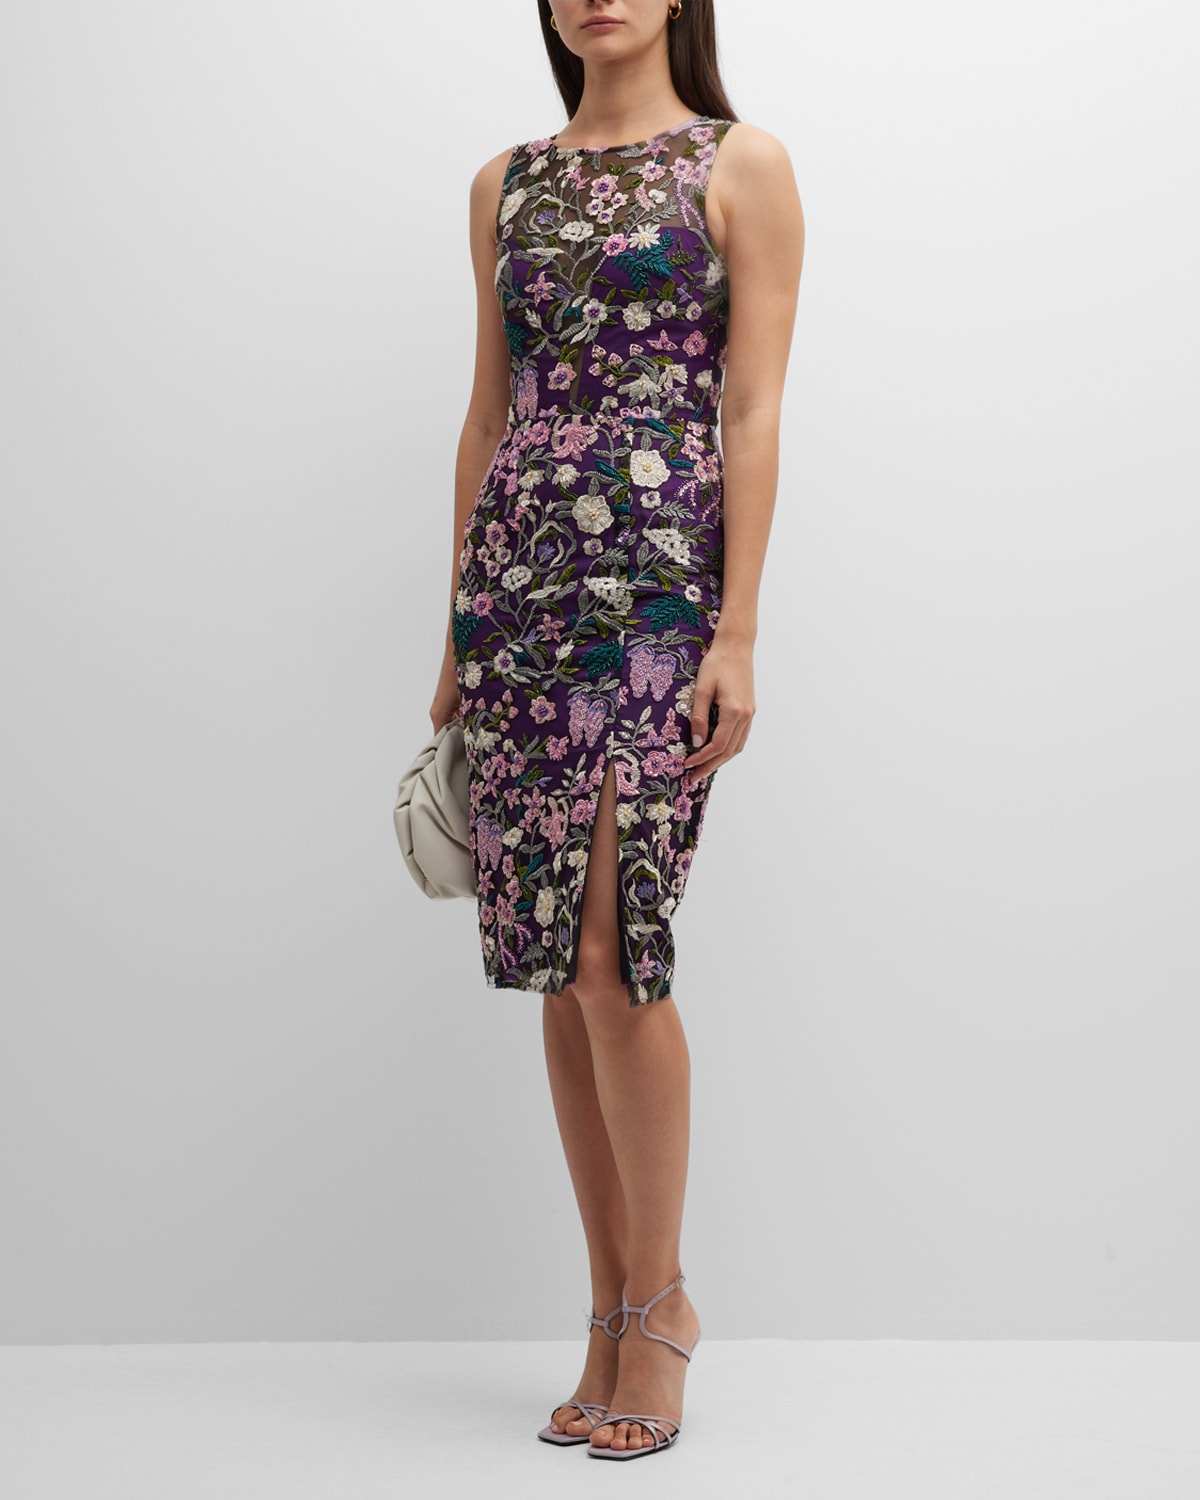 Avianna Beaded Floral-Embroidered Midi Dress